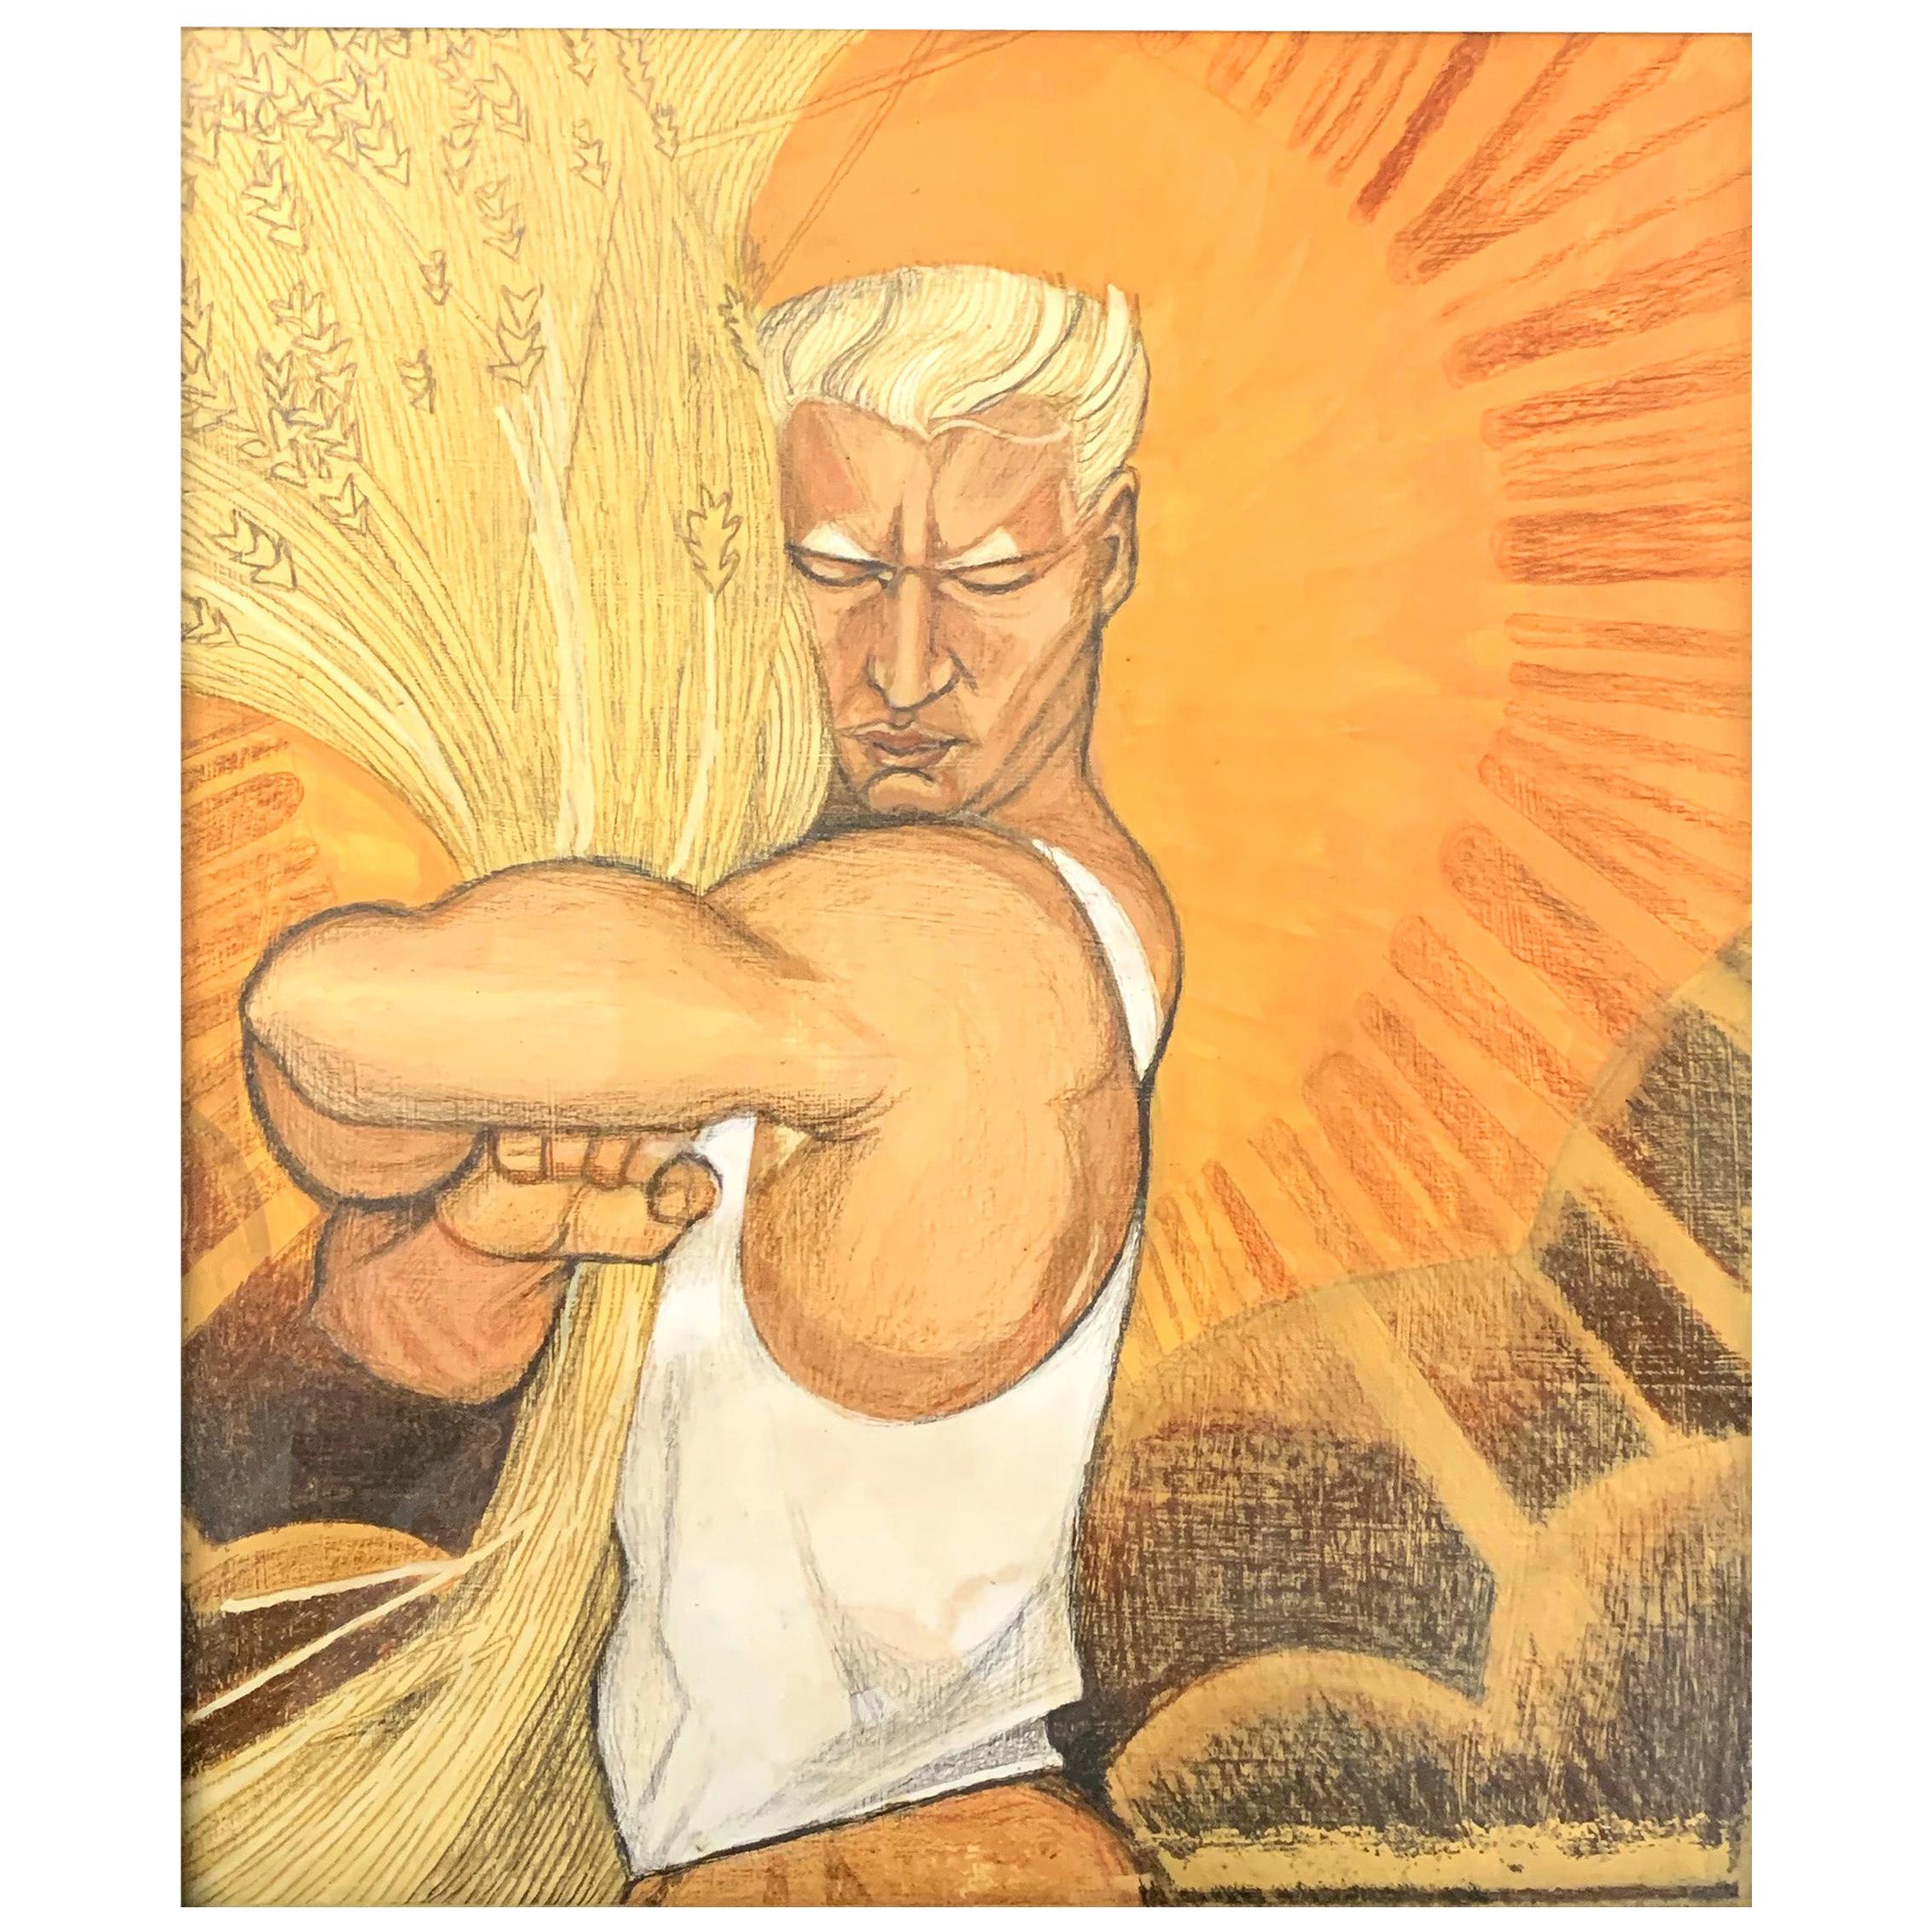 "Golden Fields," Allegorical Mural Study with Laborer Embracing Wheat Sheaf